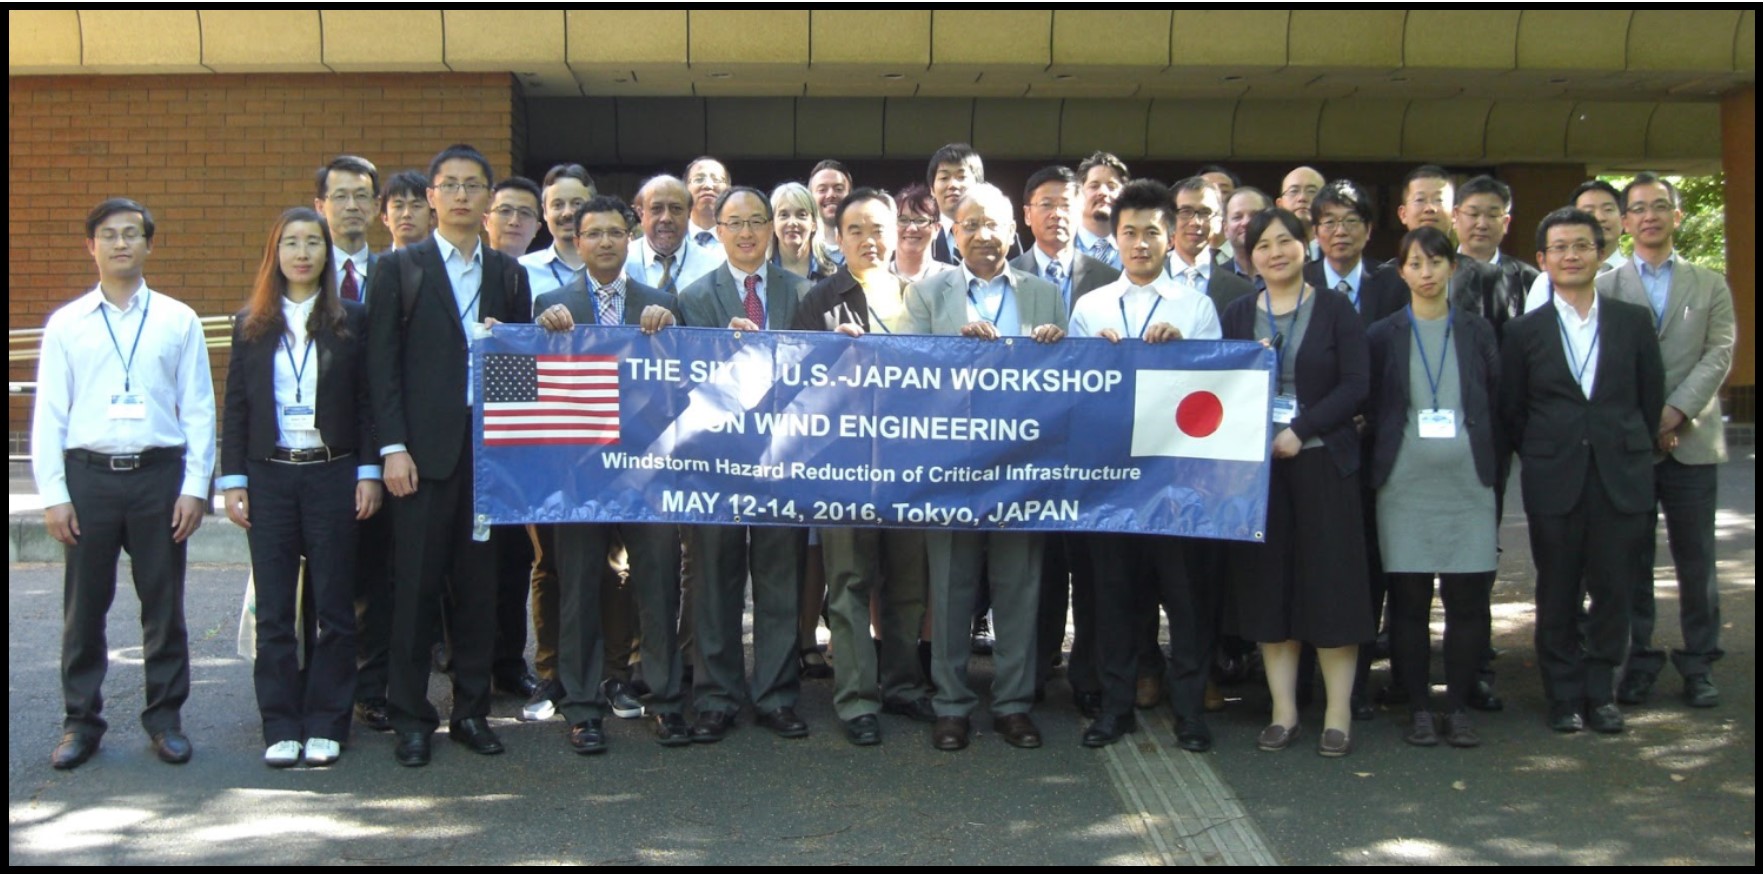 NWI faculty affiliates attend US-Japan Workshop on Wind Engineering